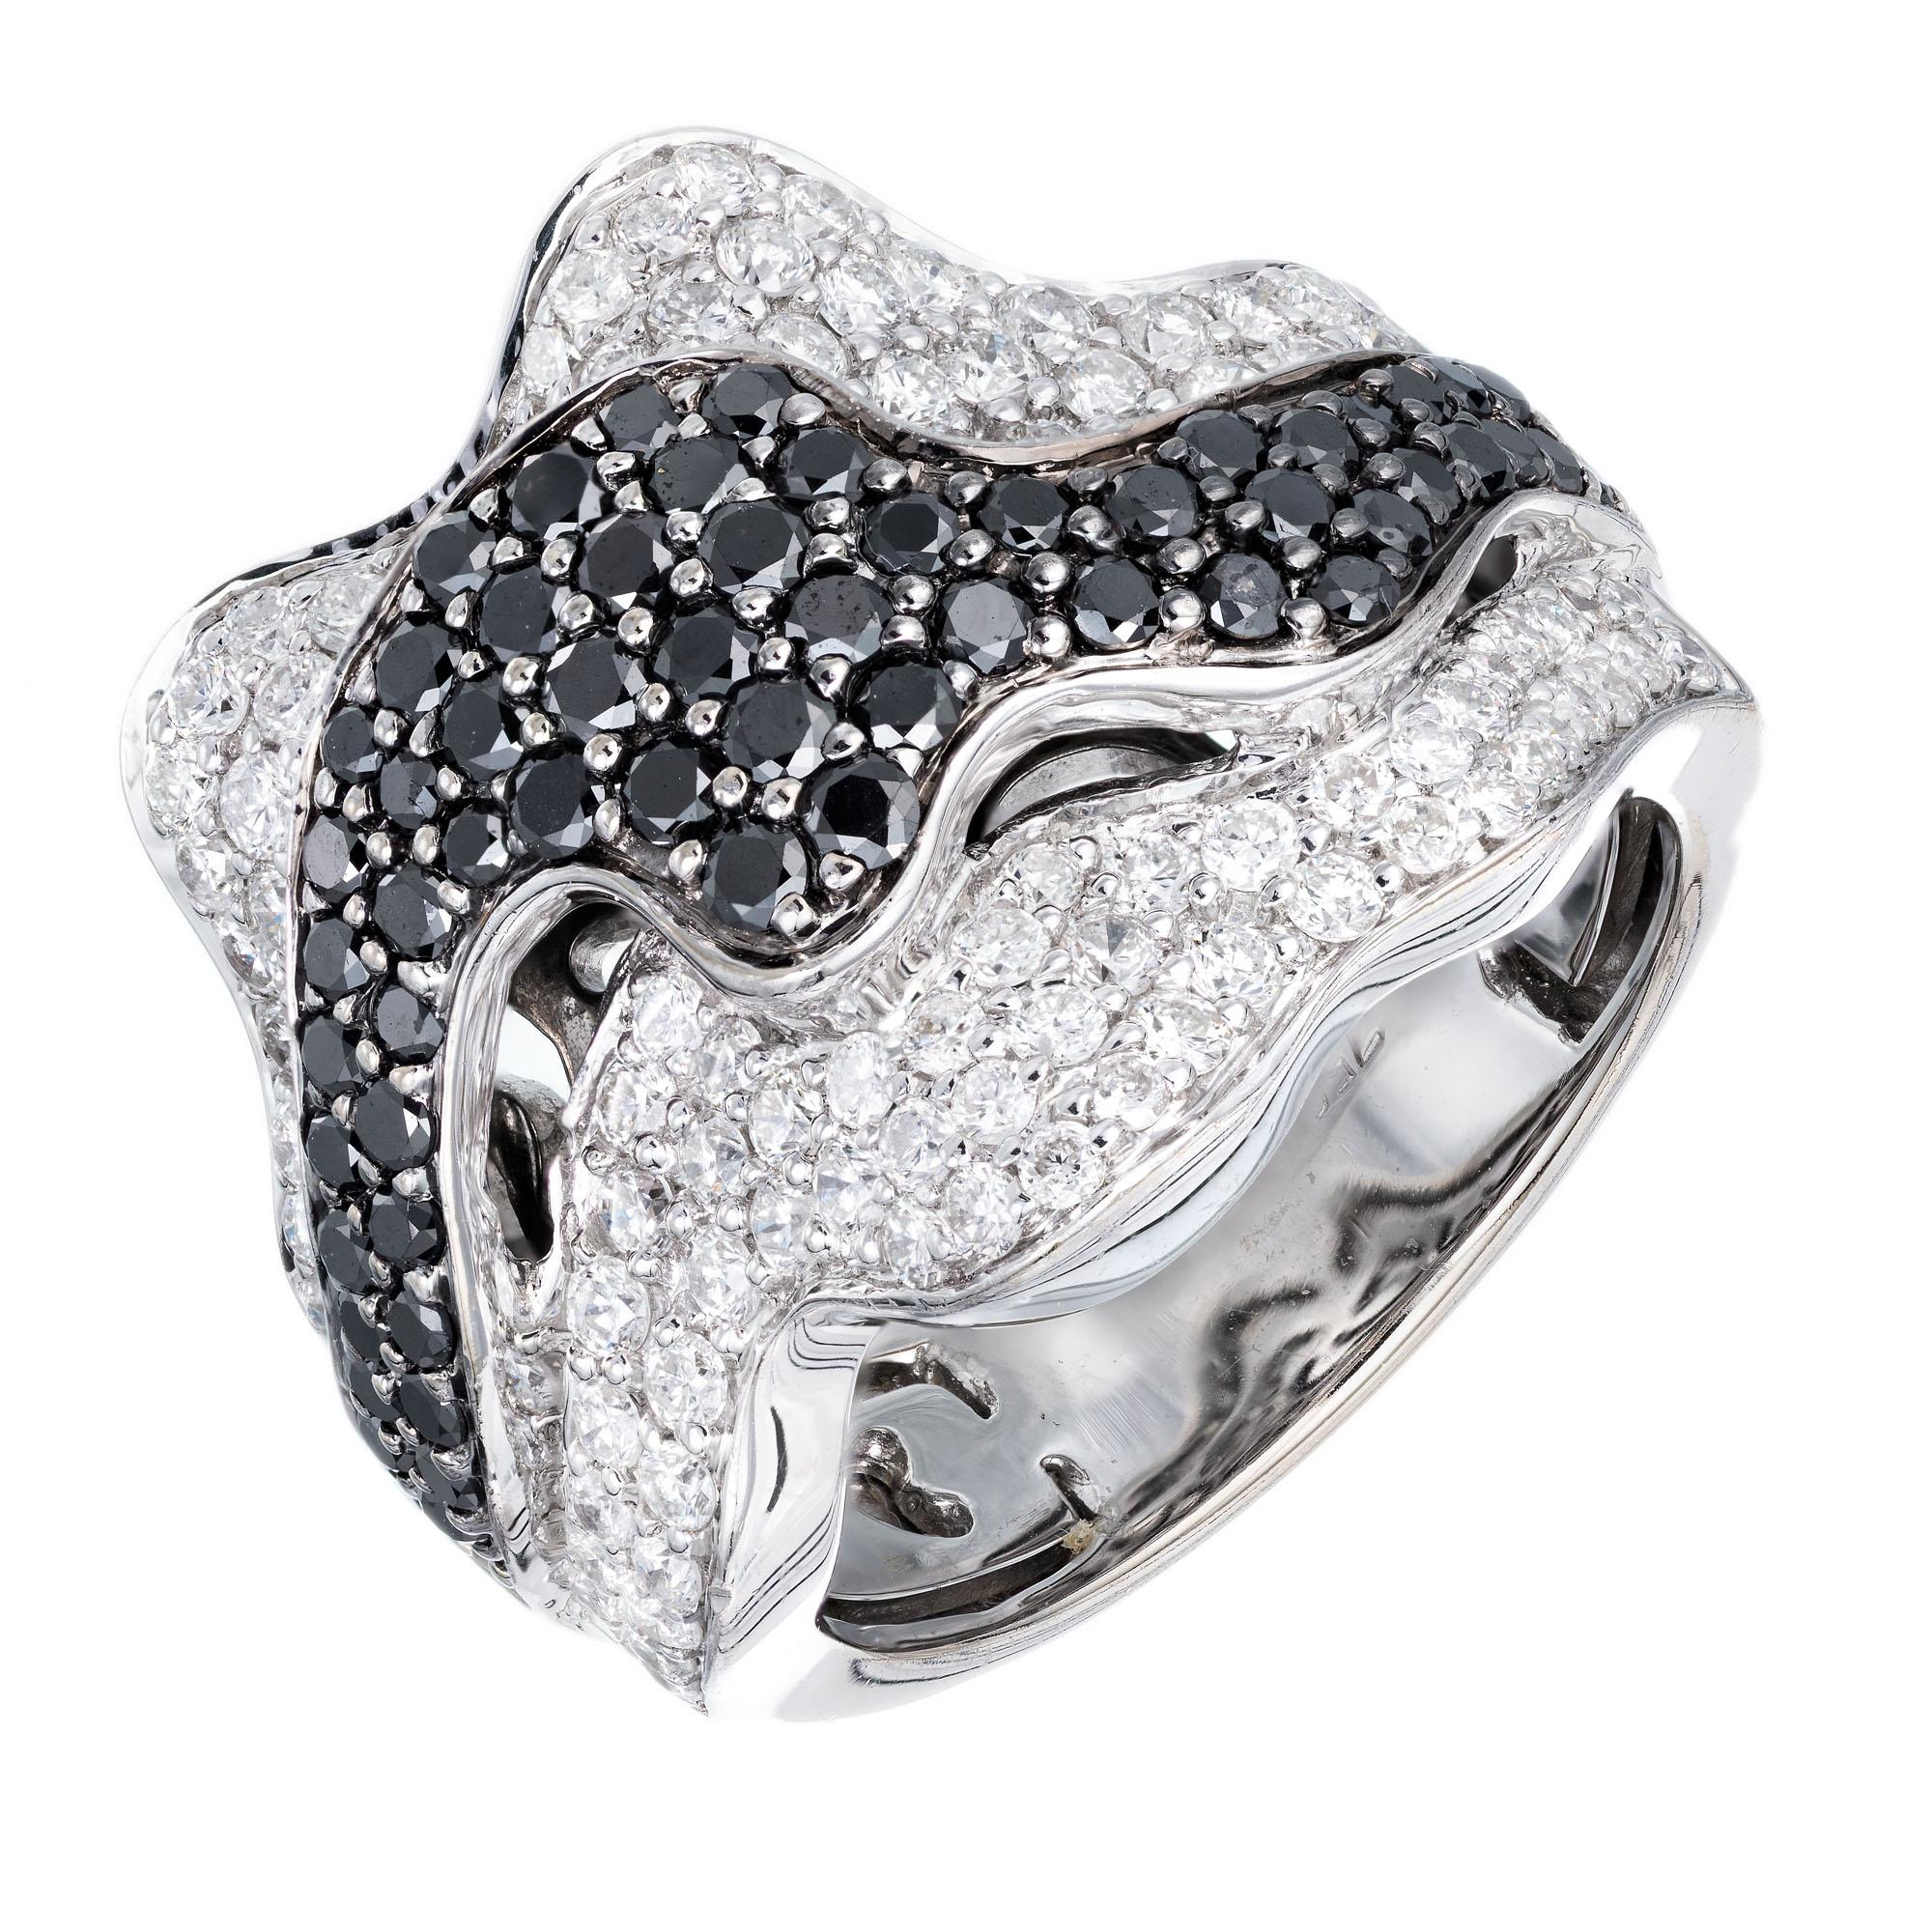 Sonia B white and black diamond cocktail ring set in 18k white gold ribbon design.

62 round black diamonds, approx. total weight .75cts
100 full cut round diamonds approx. total weight 1.25cts, G, VS
Size 6 and sizable
18k White Gold
Stamped: 750